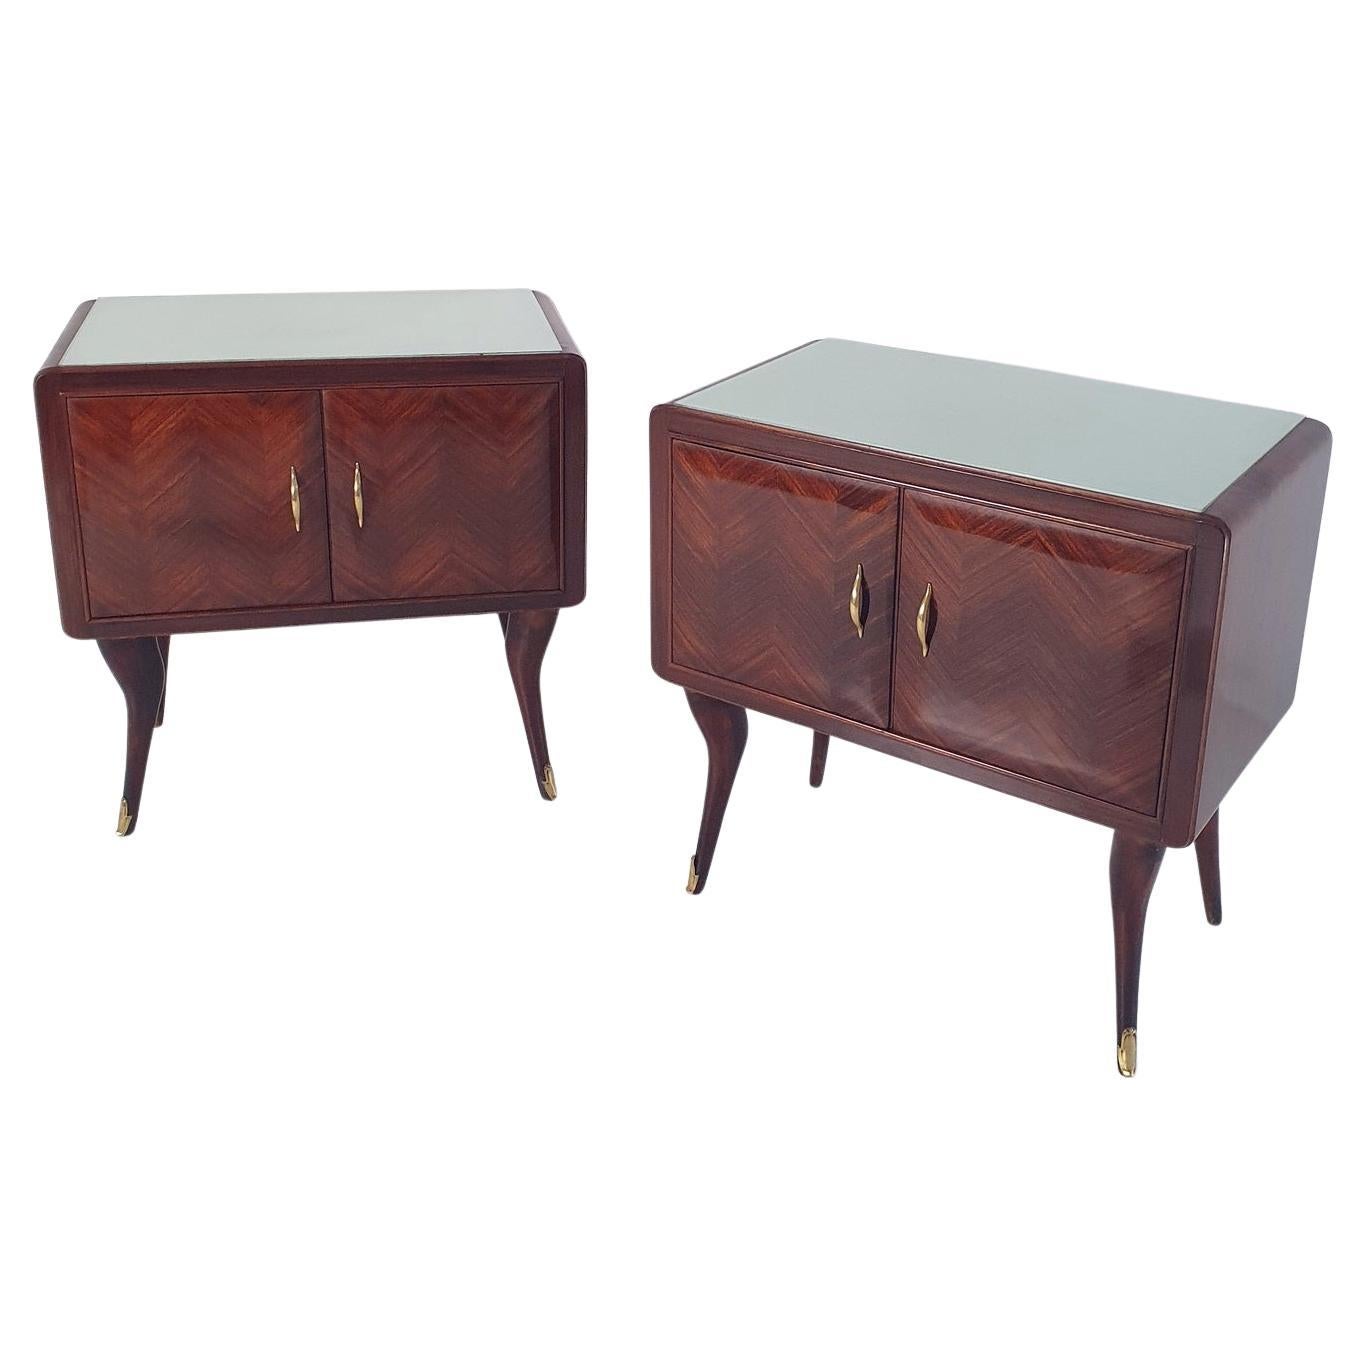 Pair of Nightstands in style of Ico Parisi, Italy